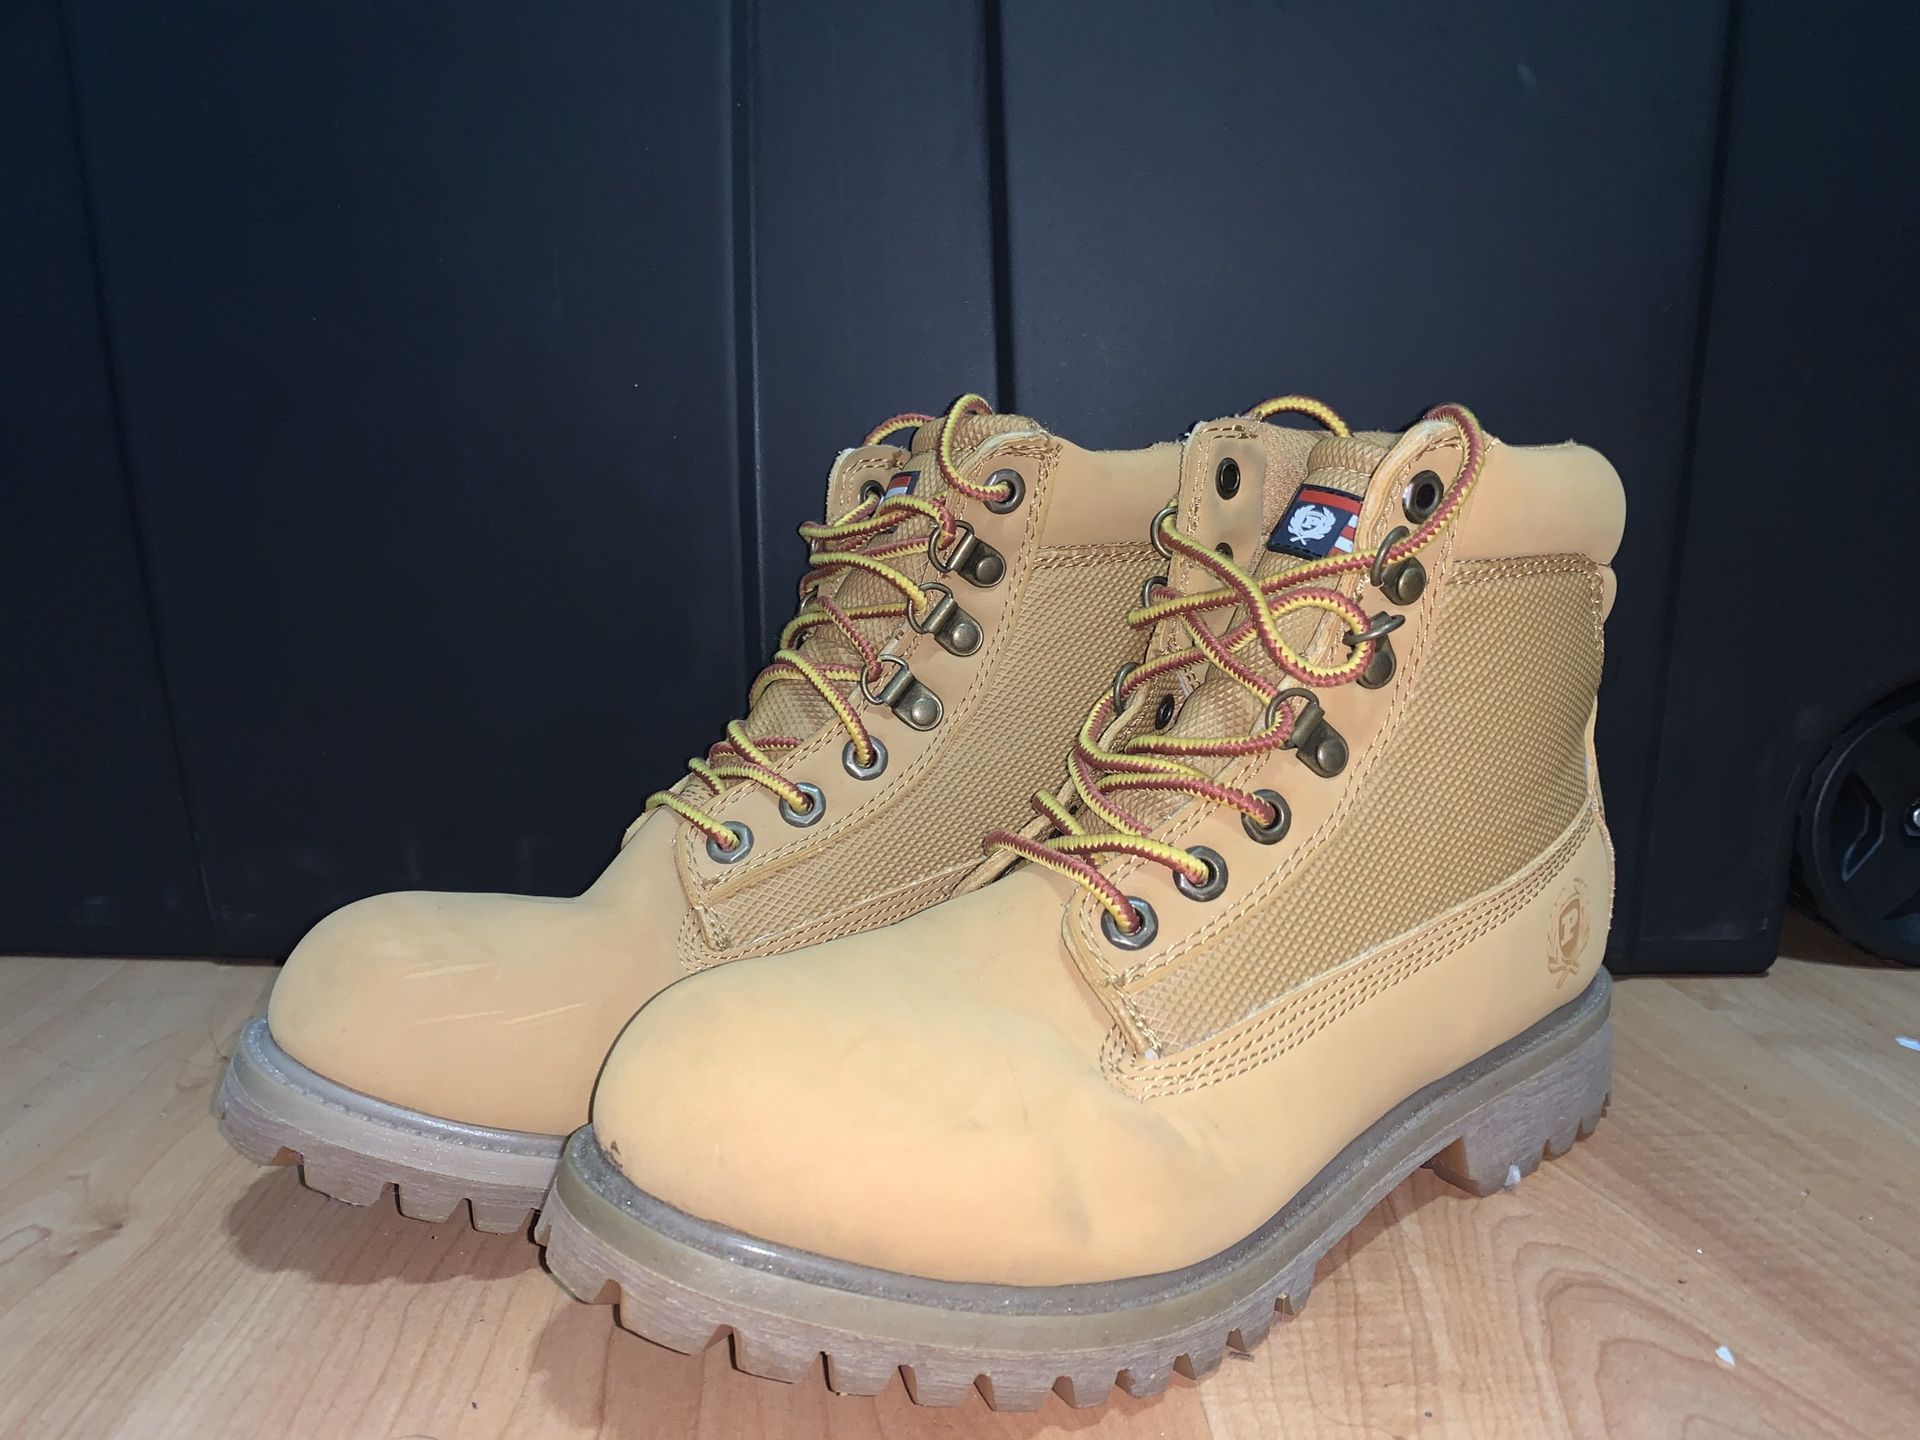 Phat Farm Timberland Boots size 7.5